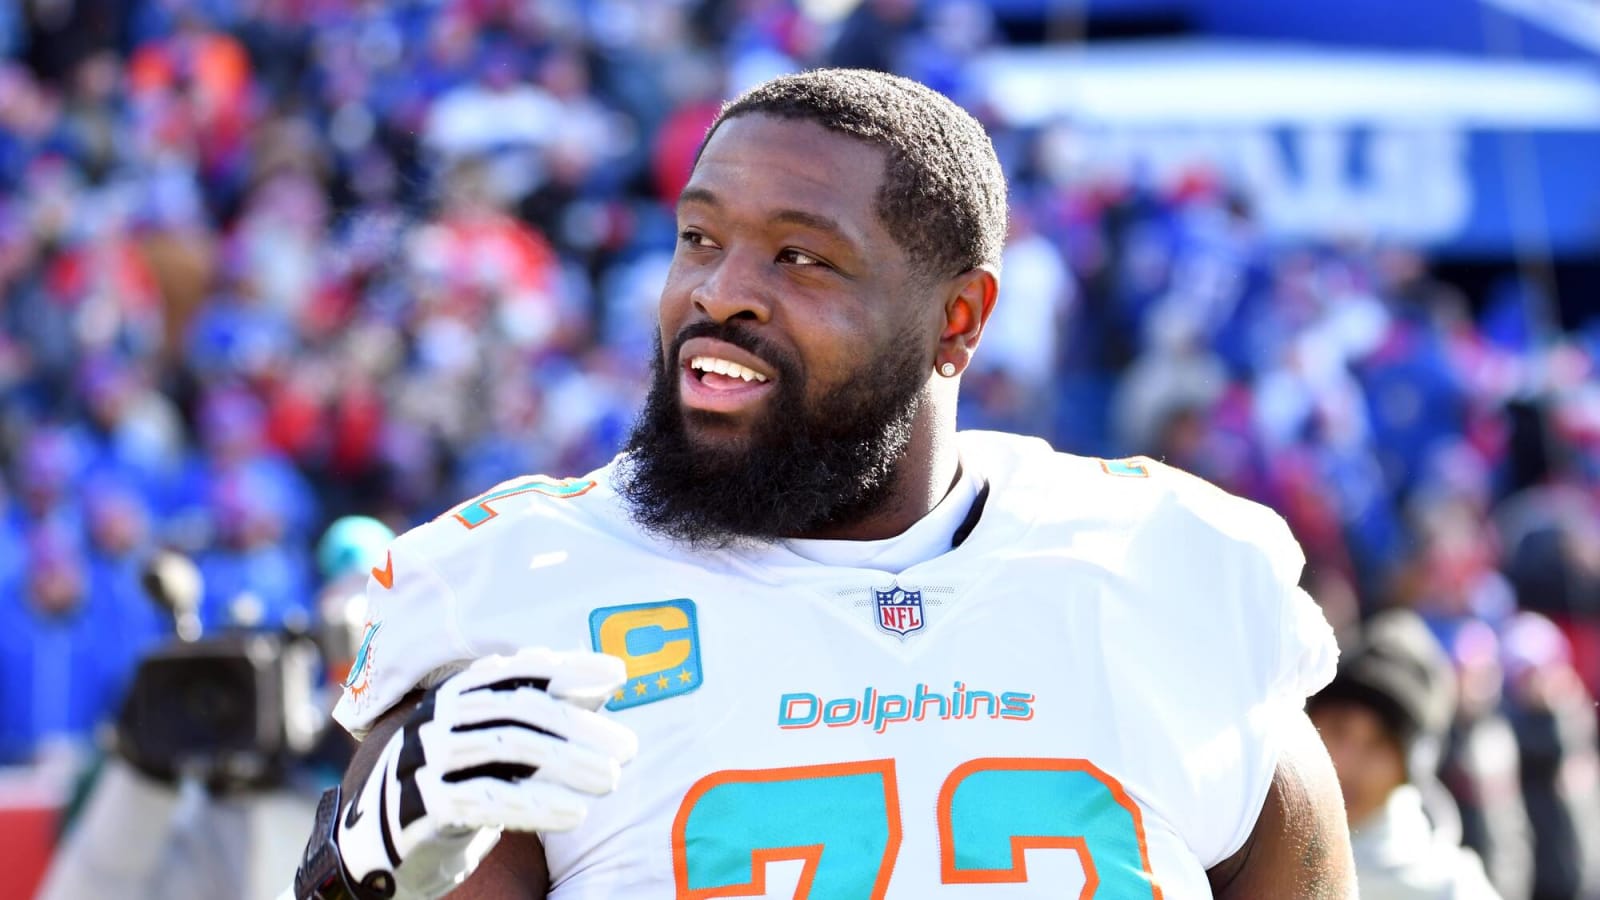 The most important Dolphins player may not be who you think